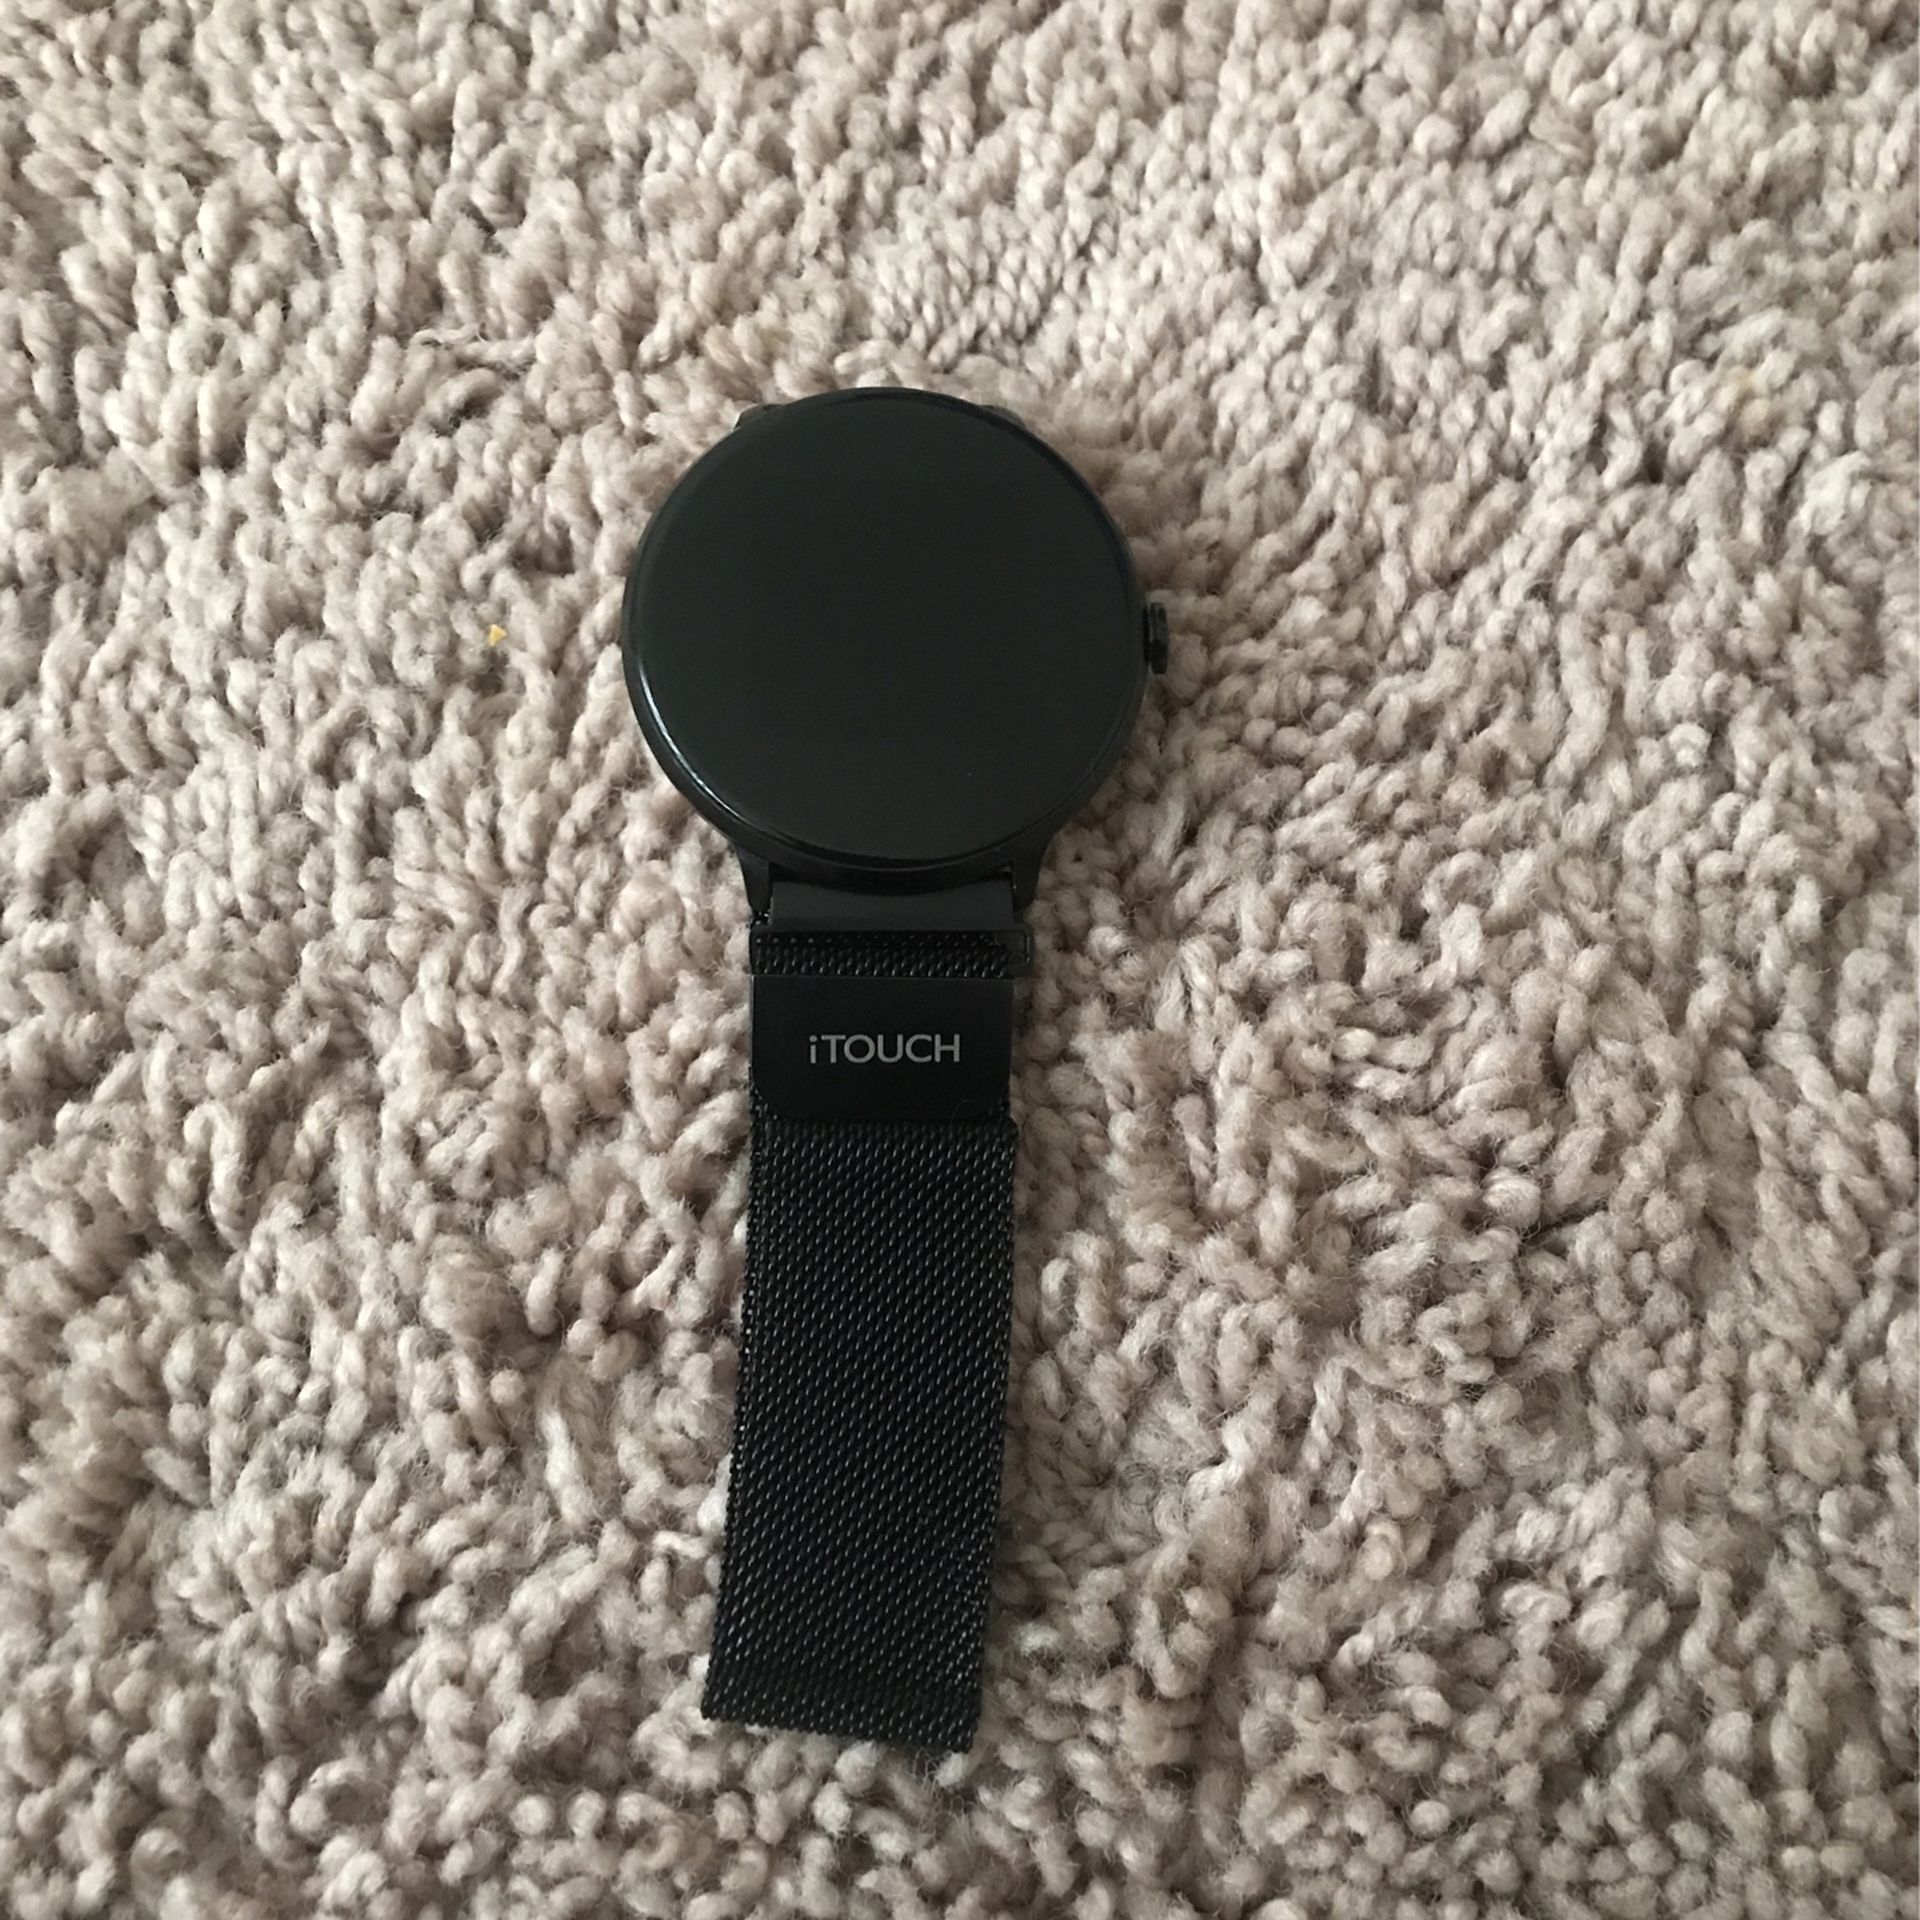 iTouch smart watch with charger